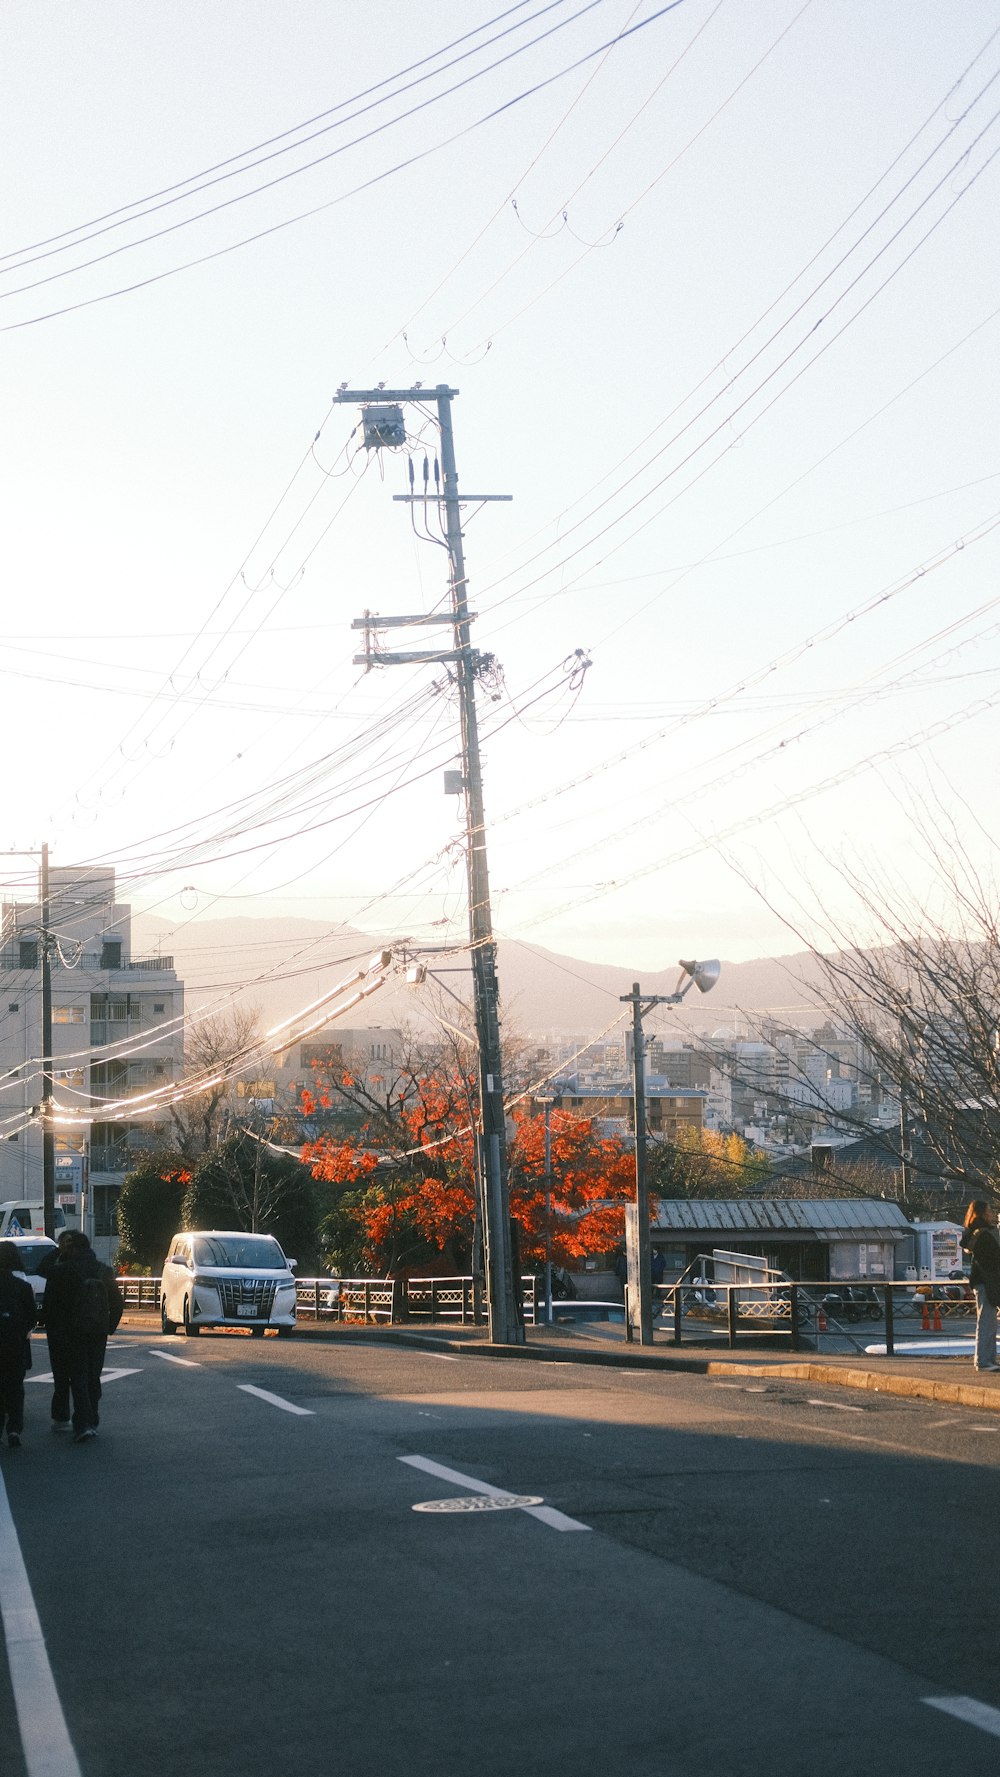 a group of people walking down a street next to power lines